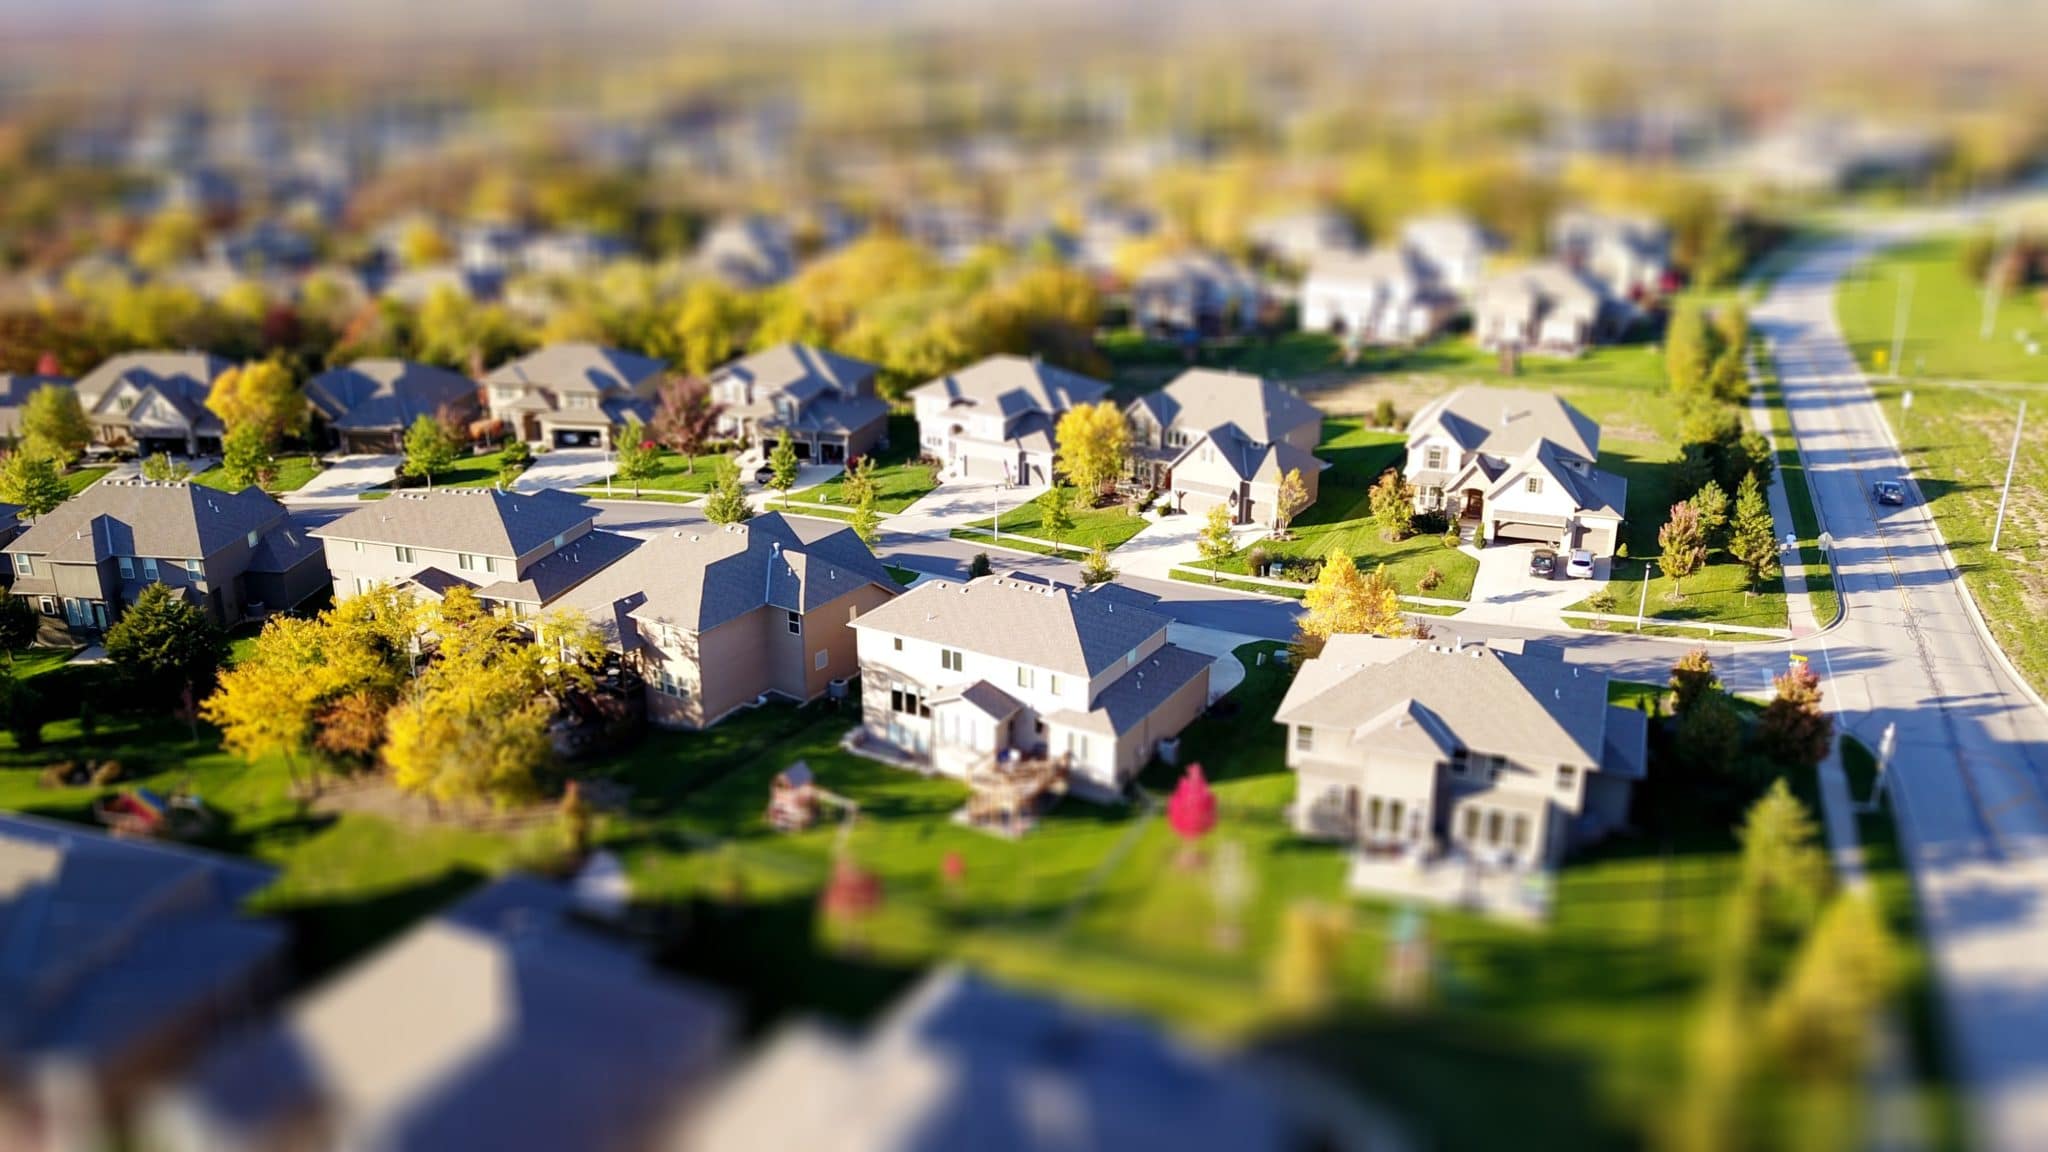 A suburban neighborhood in an areal shot with a street of houses sharp in the middle with the surrounding picture blurred.